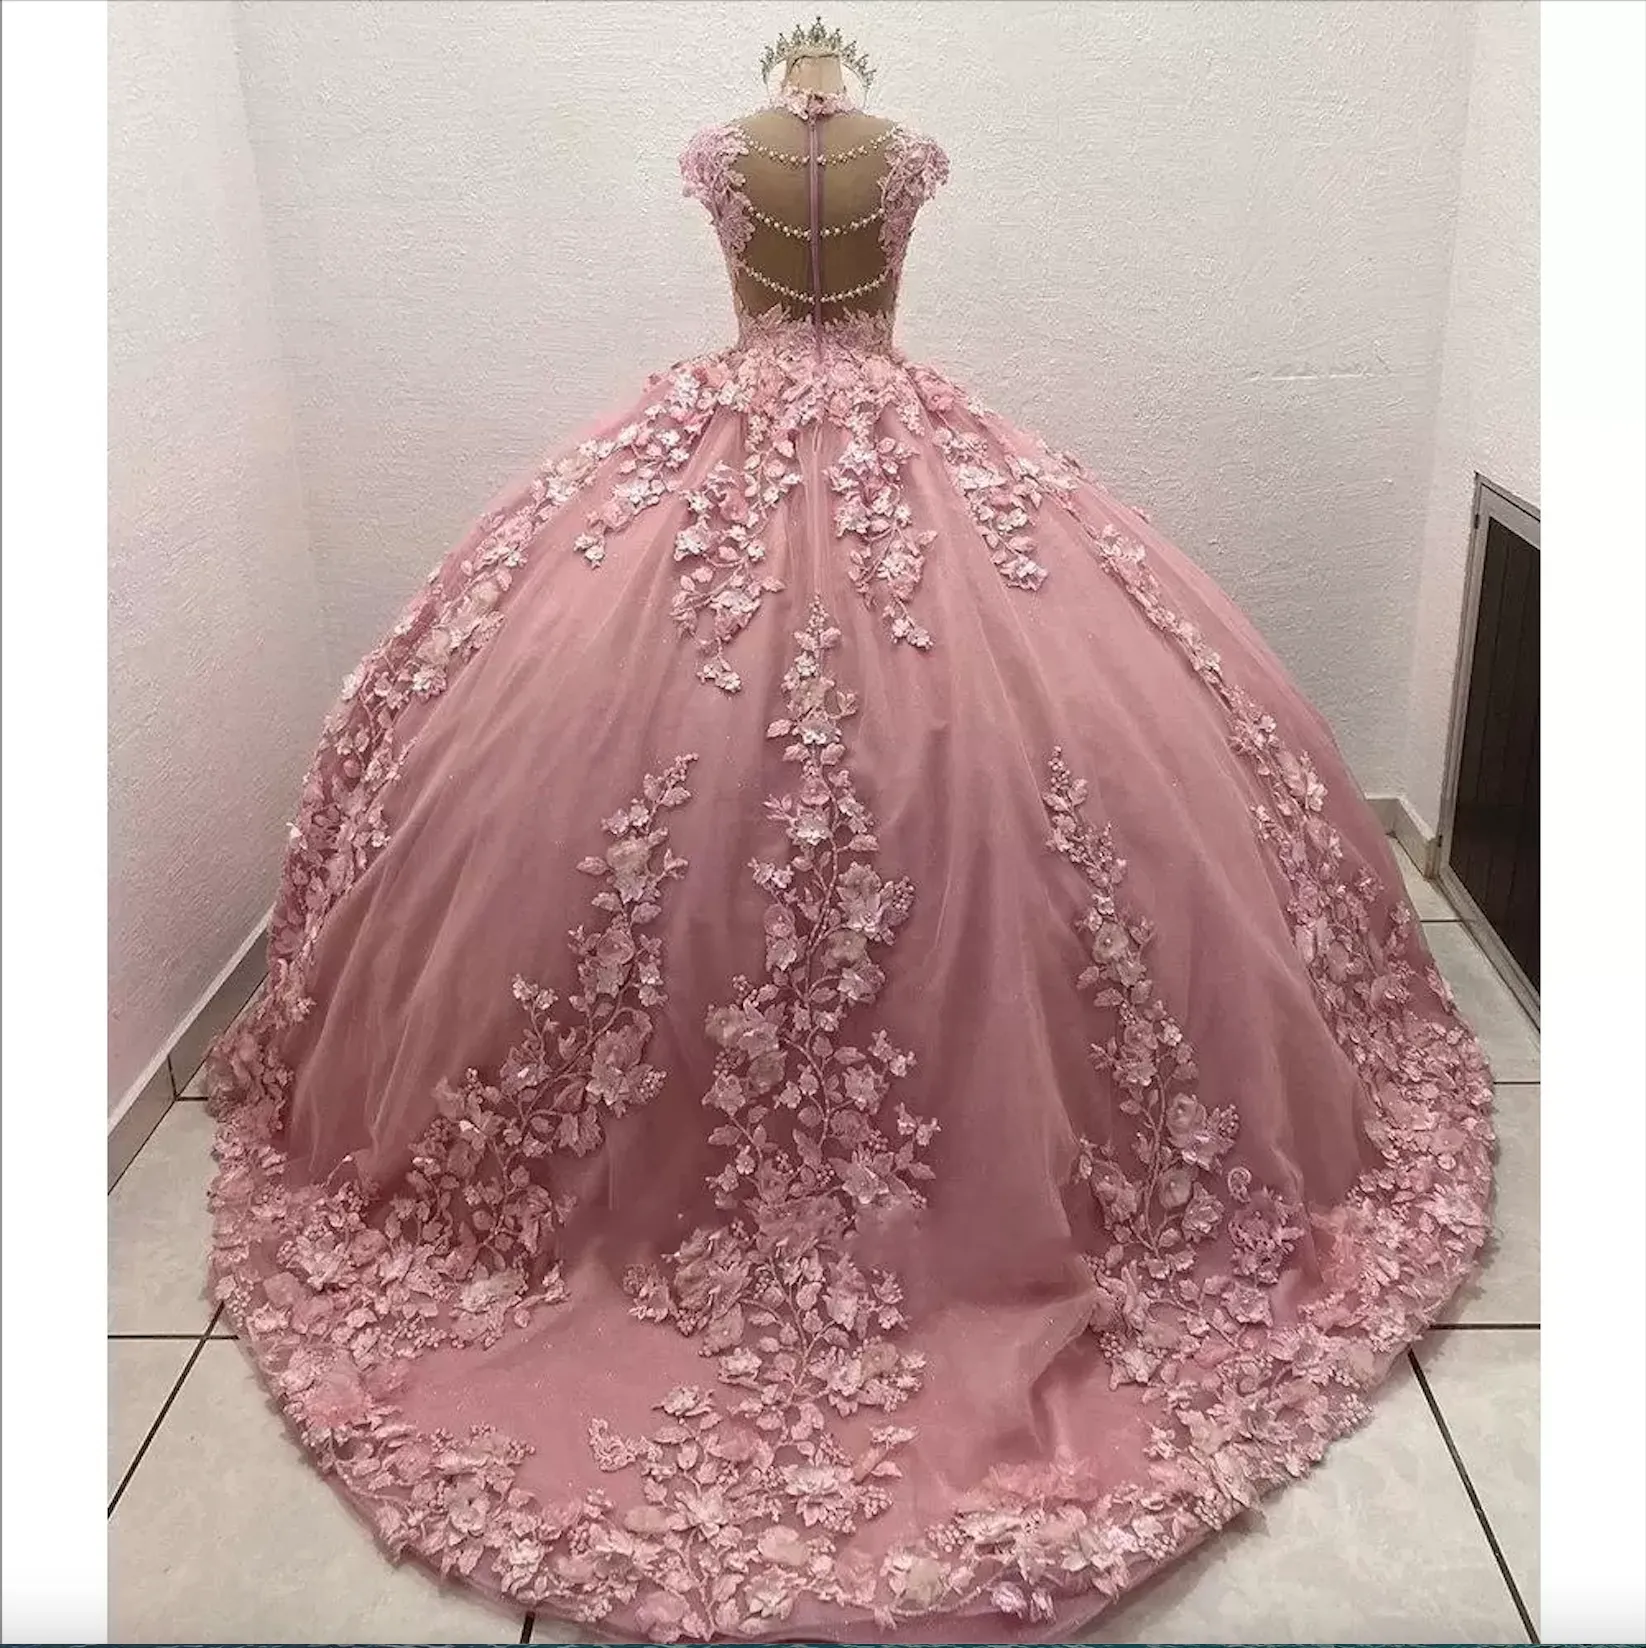 Pink High Neck Quinceanera Dresses Cap Sleeve Lace Flower Mexican 3D Floral Sweet 15 Gowns Puffy Skirt Vestidos 16 Anos